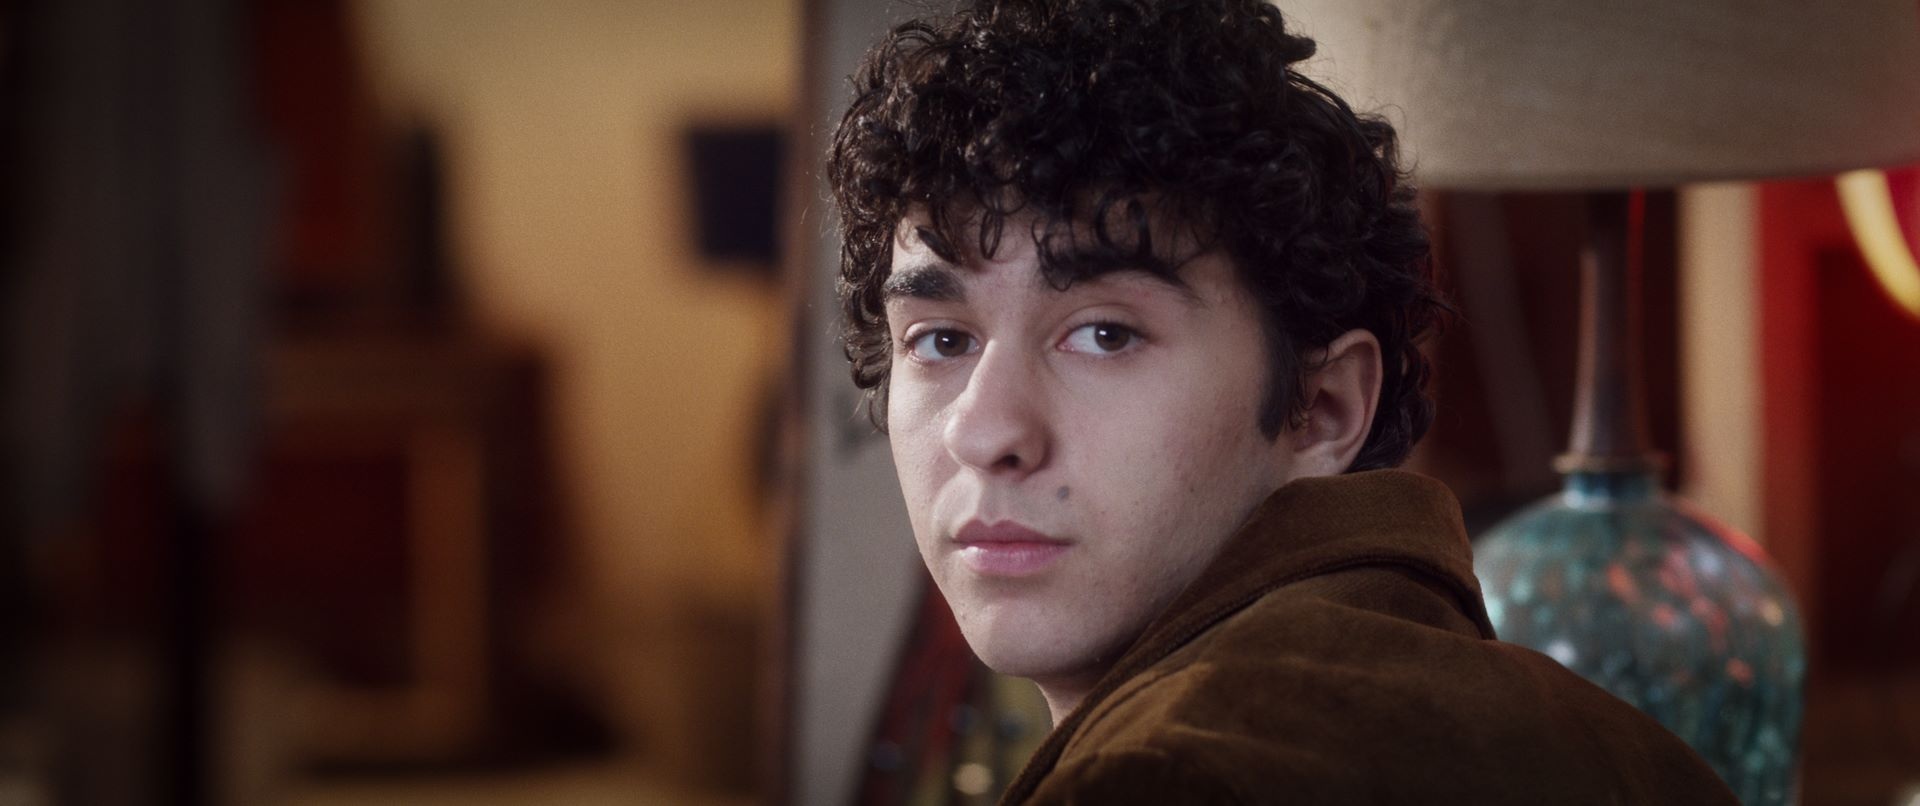 Actor Alex Wolff in Coming Through the Rye. Makeup by Tara DiPetrillo